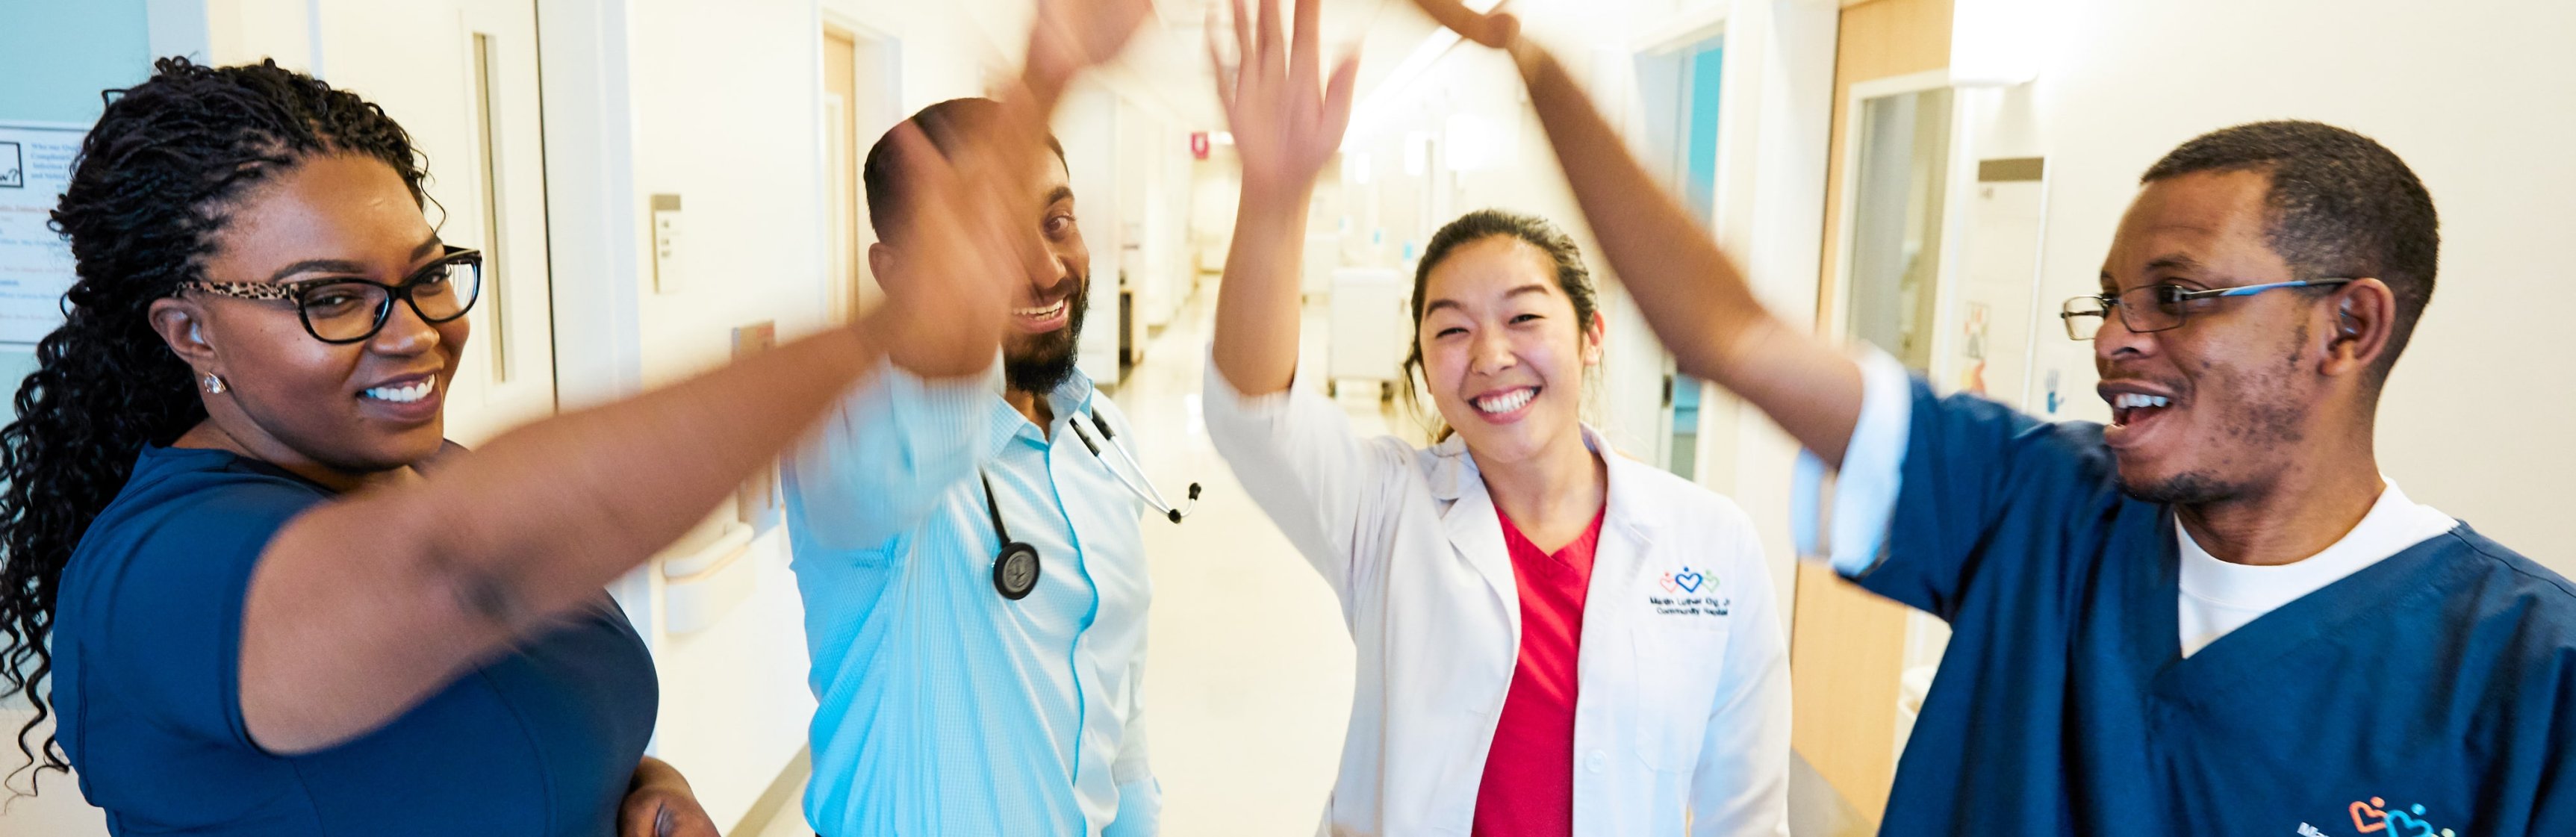 Diverse group of four doctors and nurses smiling and high-fiving